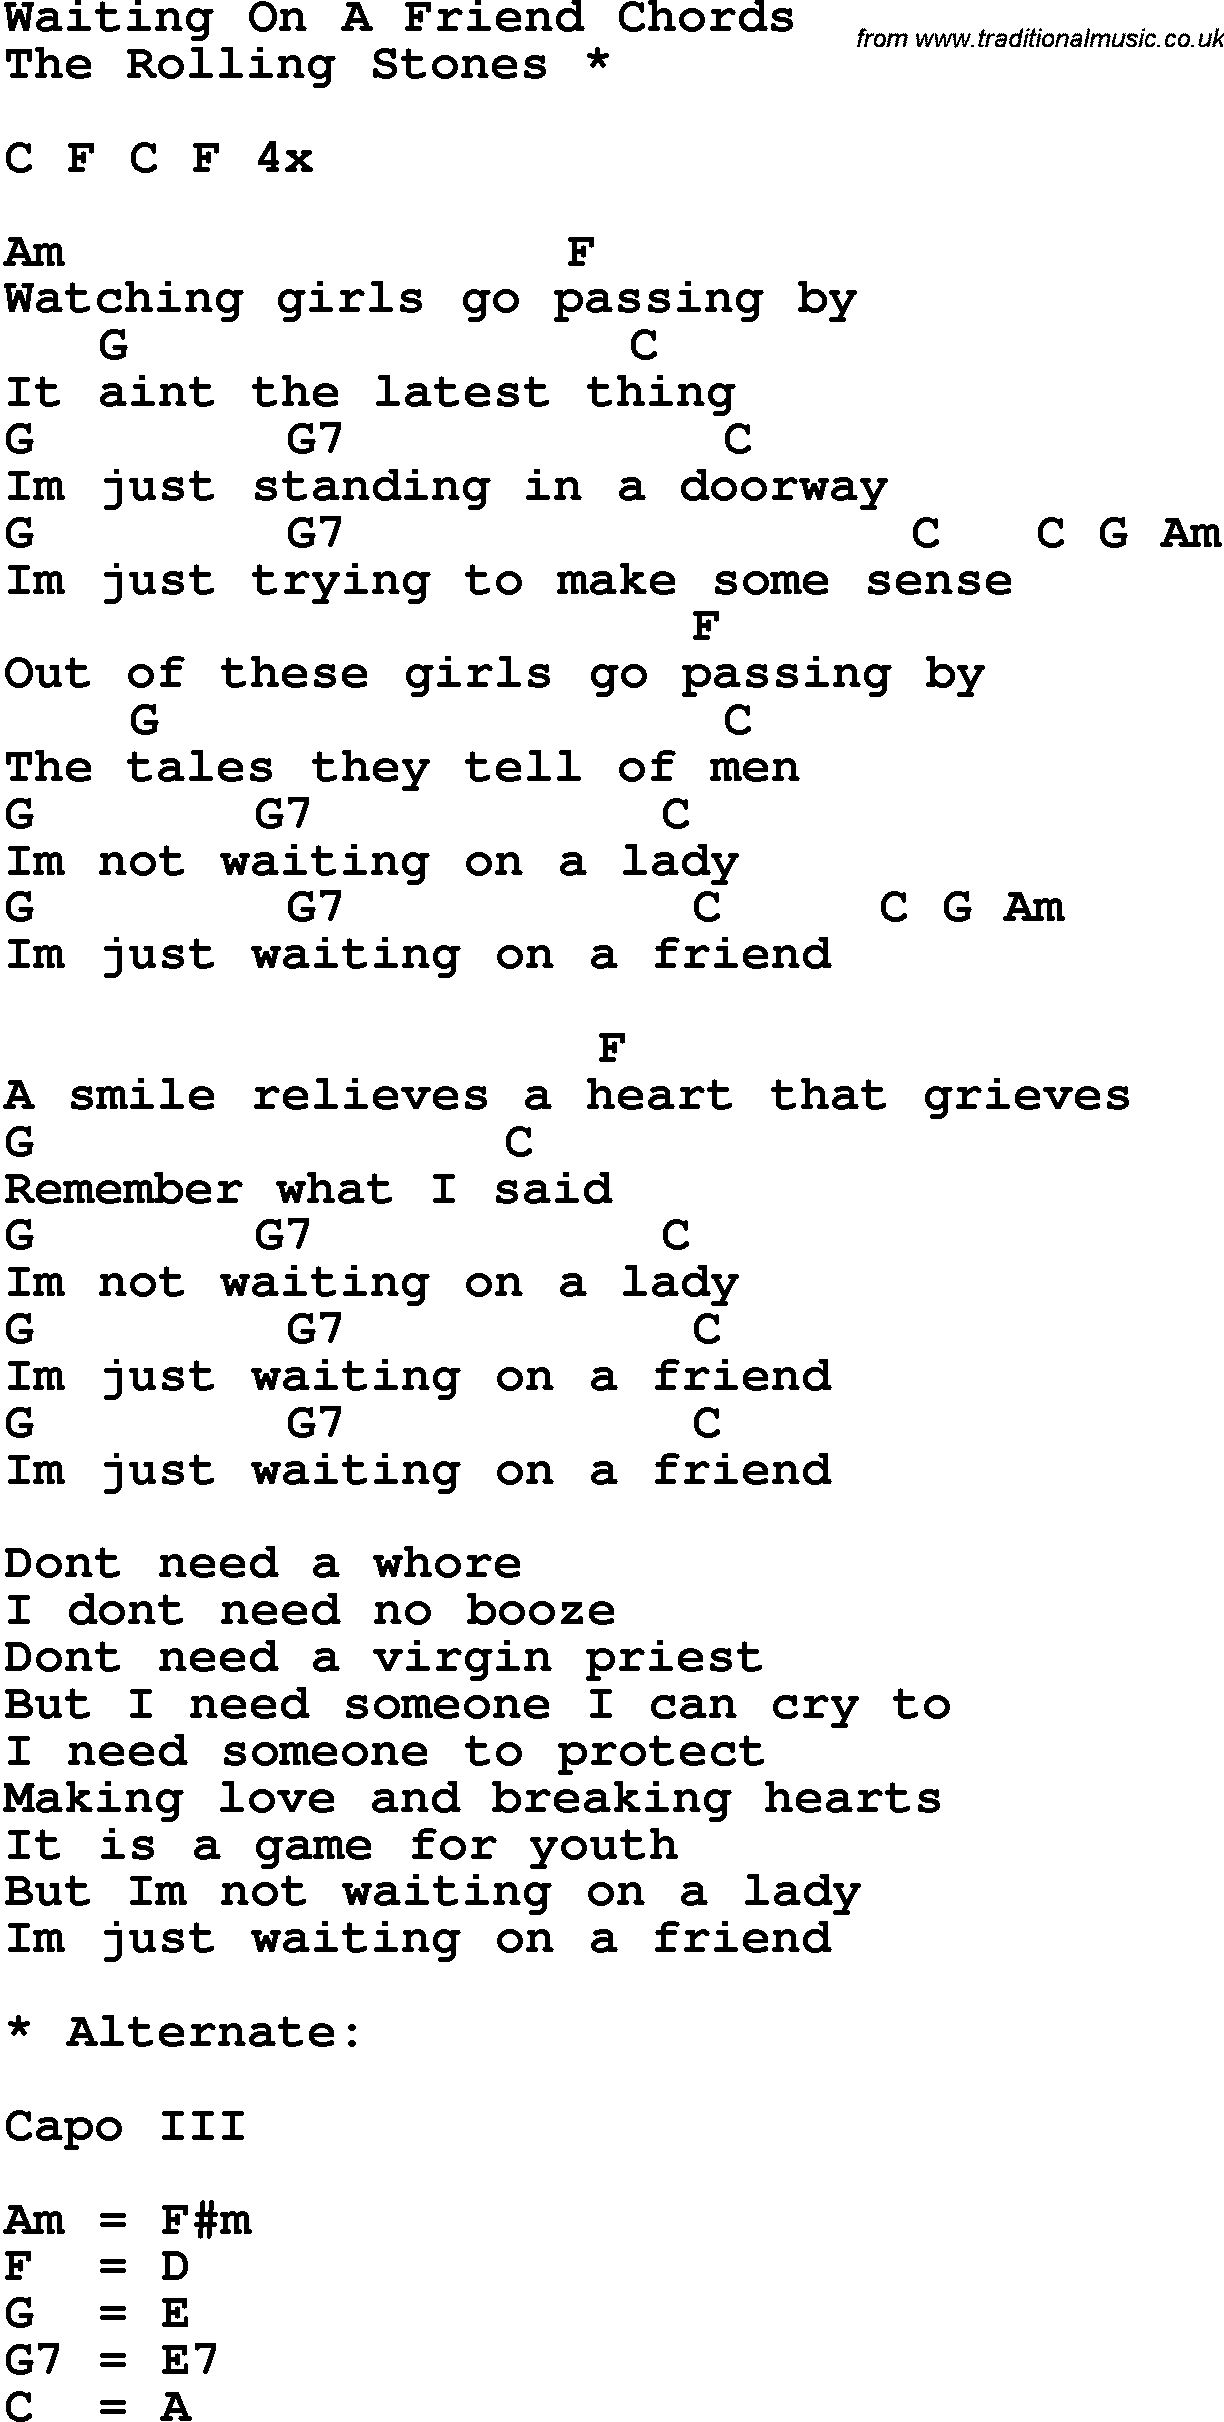 Song Lyrics with guitar chords for Waiting On A Friend